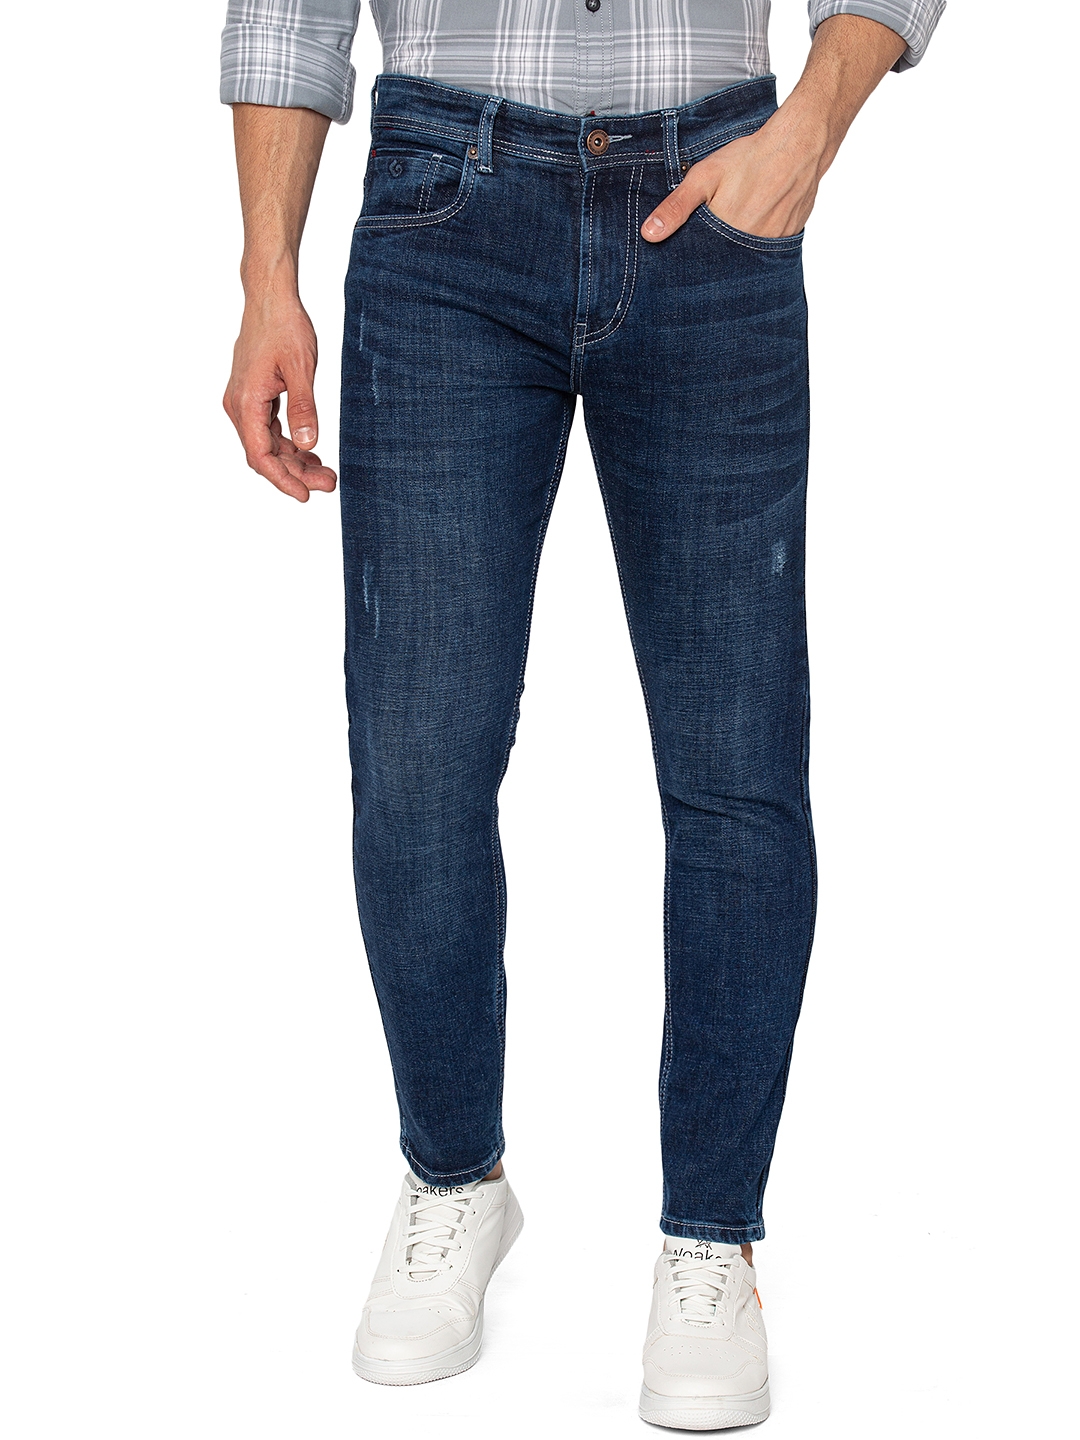 Greenfibre | River Blue Washed Urban Fit Jeans | Greenfibre